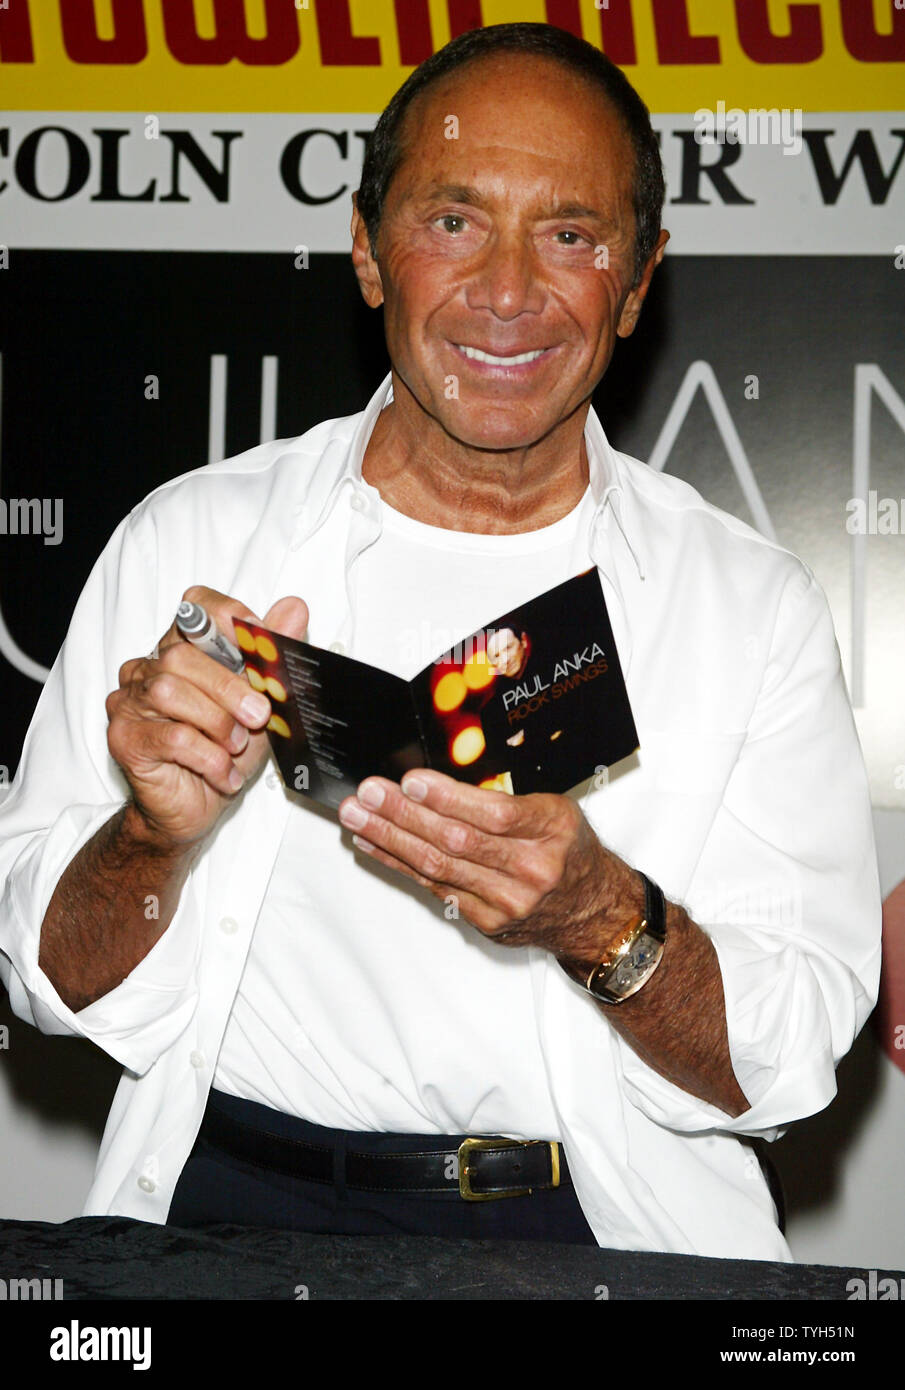 Paul Anka signs copies of his new CD "Rock Swings" at Tower Records in New  York on June 9, 2005. (UPI Photo/Laura Cavanaugh Stock Photo - Alamy